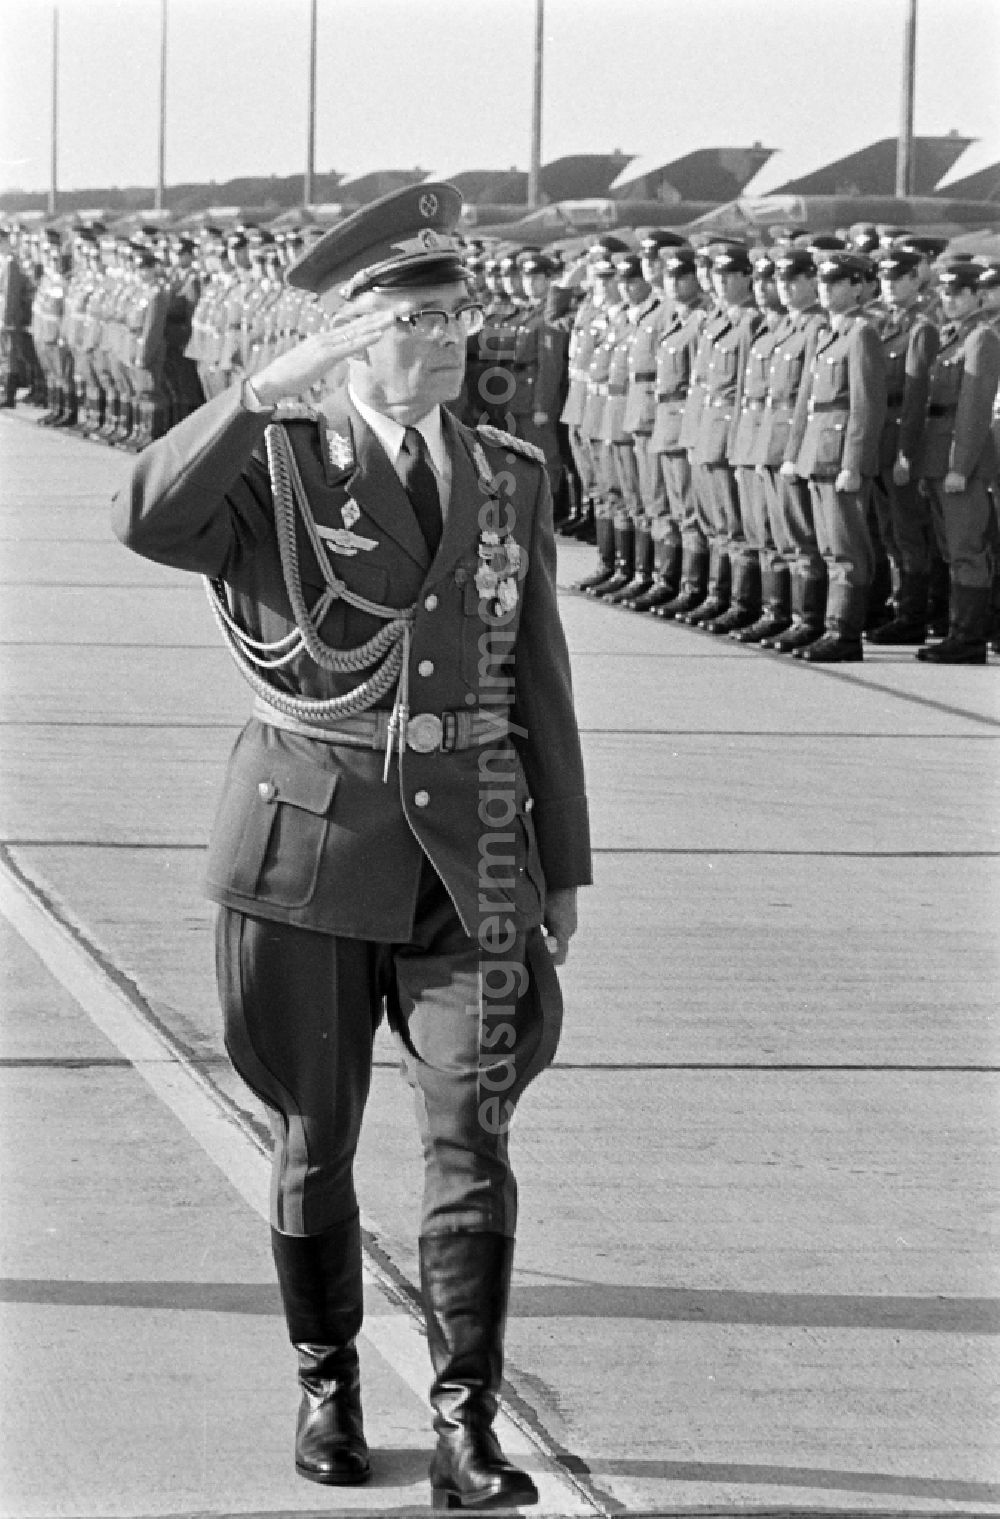 Jänschwalde: Colonel-General Wolfgang Reinhold, head of the LSK/LV air force - air defense walking the honor formation on the occasion of the media-effective presentation of flight technology and equipment of the MiG-21 PFM weapon system as part of a disarmament campaign at the Drewitz airfield of the Wilhelm Pieck fighter squadron of the National People's Army NVA office in Jaenschwalde in the state of Brandenburg on the territory of the former GDR, German Democratic Republic